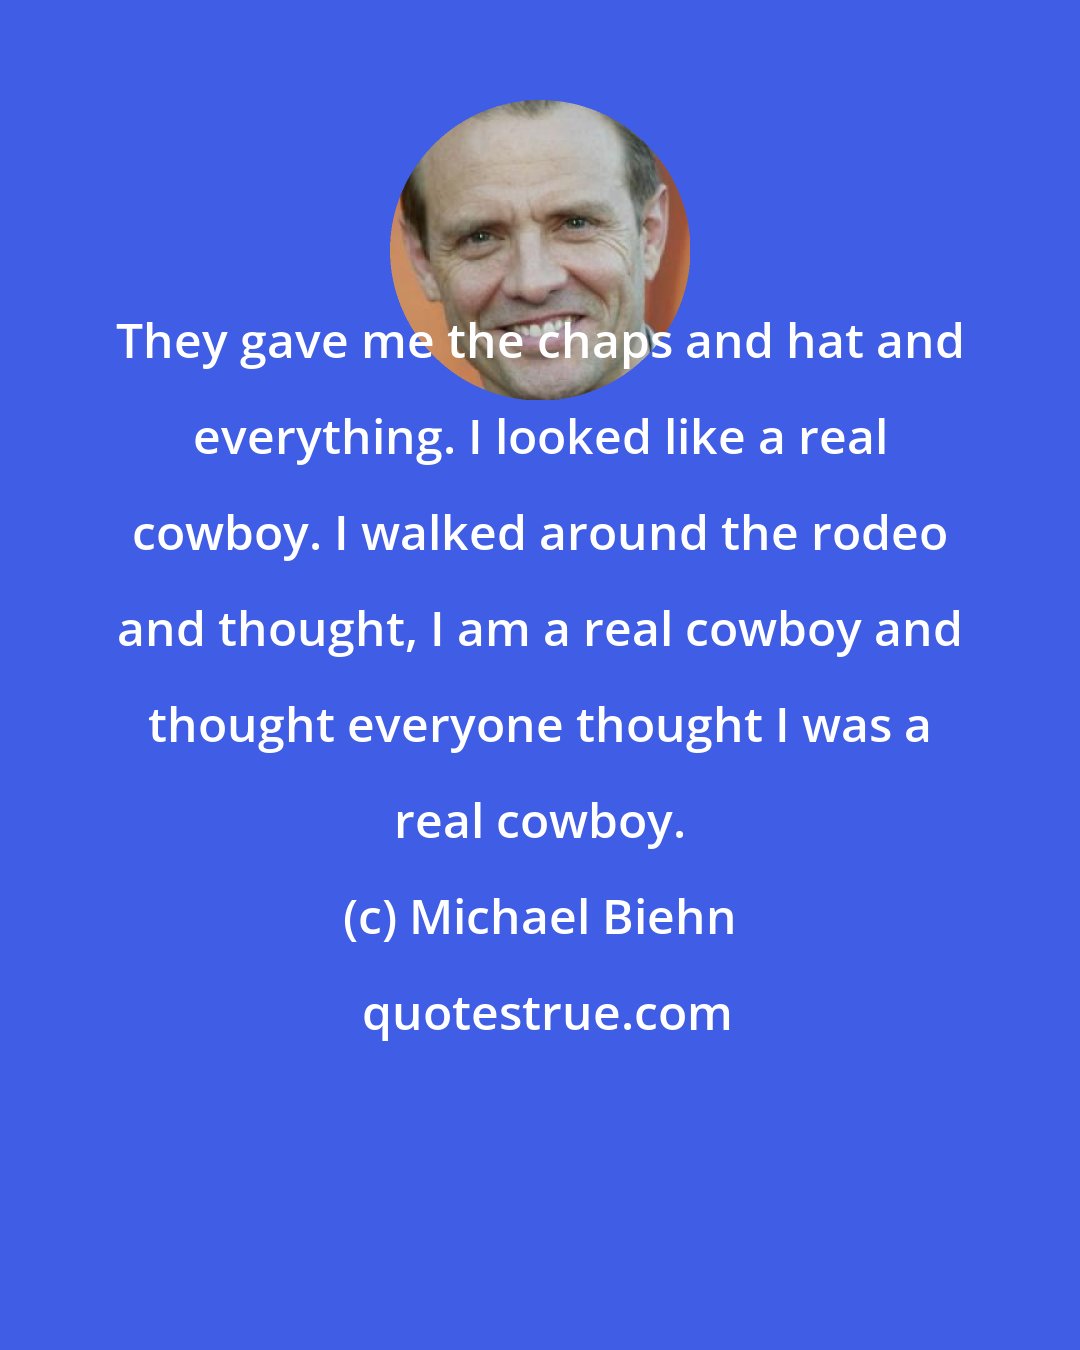 Michael Biehn: They gave me the chaps and hat and everything. I looked like a real cowboy. I walked around the rodeo and thought, I am a real cowboy and thought everyone thought I was a real cowboy.